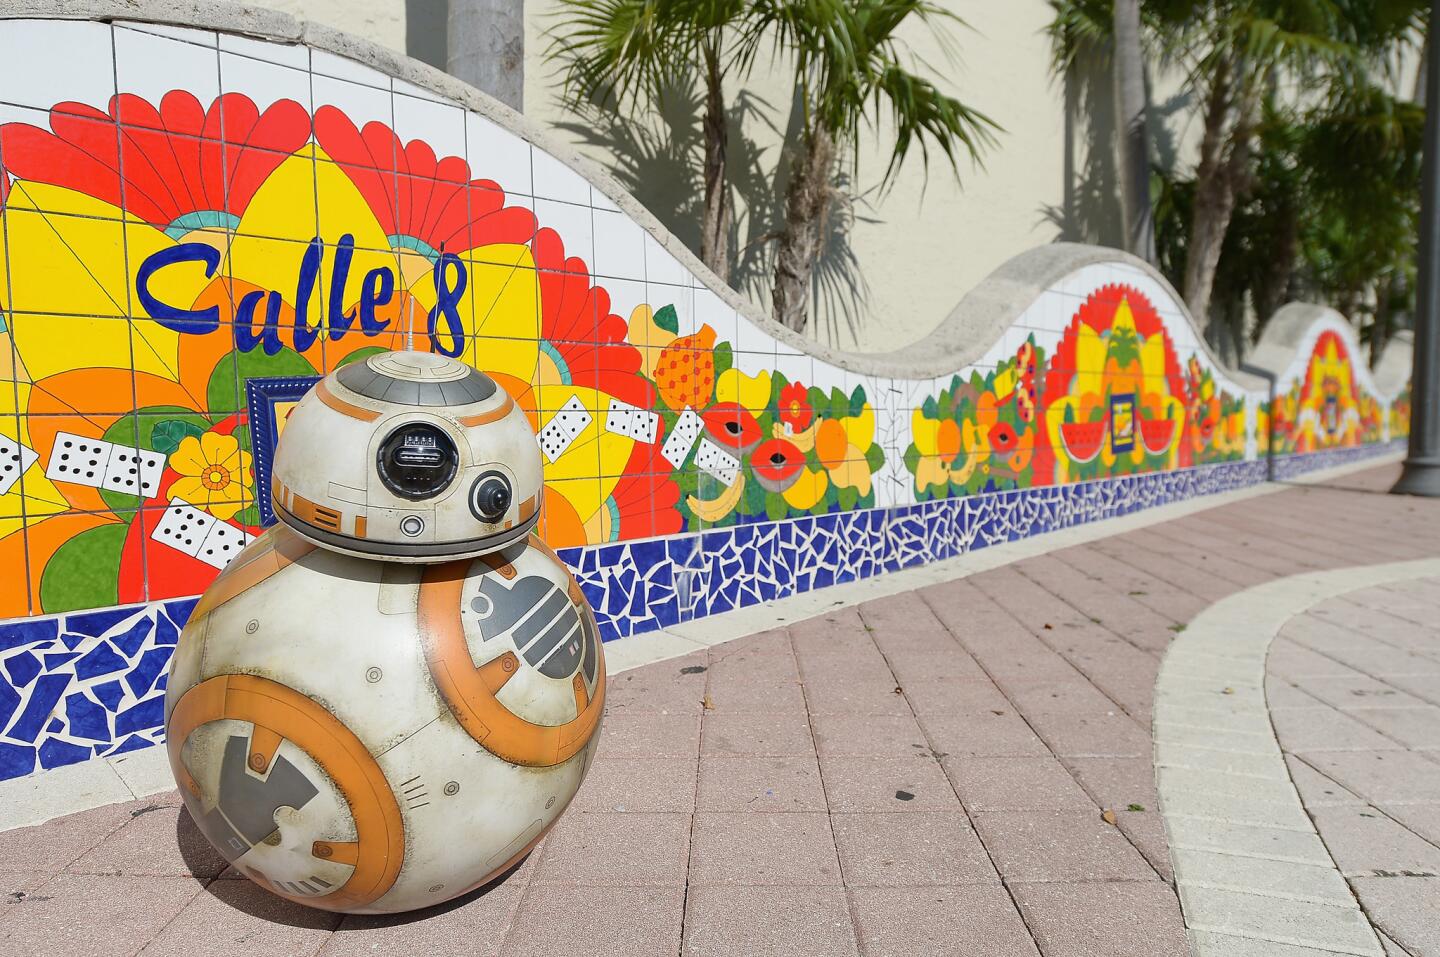 "MIAMI, FLORIDA - APRIL 05: BB-8 takes over Calle Ocho (Lucas Films 2016) on April 5, 2016 in Miami, Florida. (Photo by Gustavo Caballero/Getty Images)"